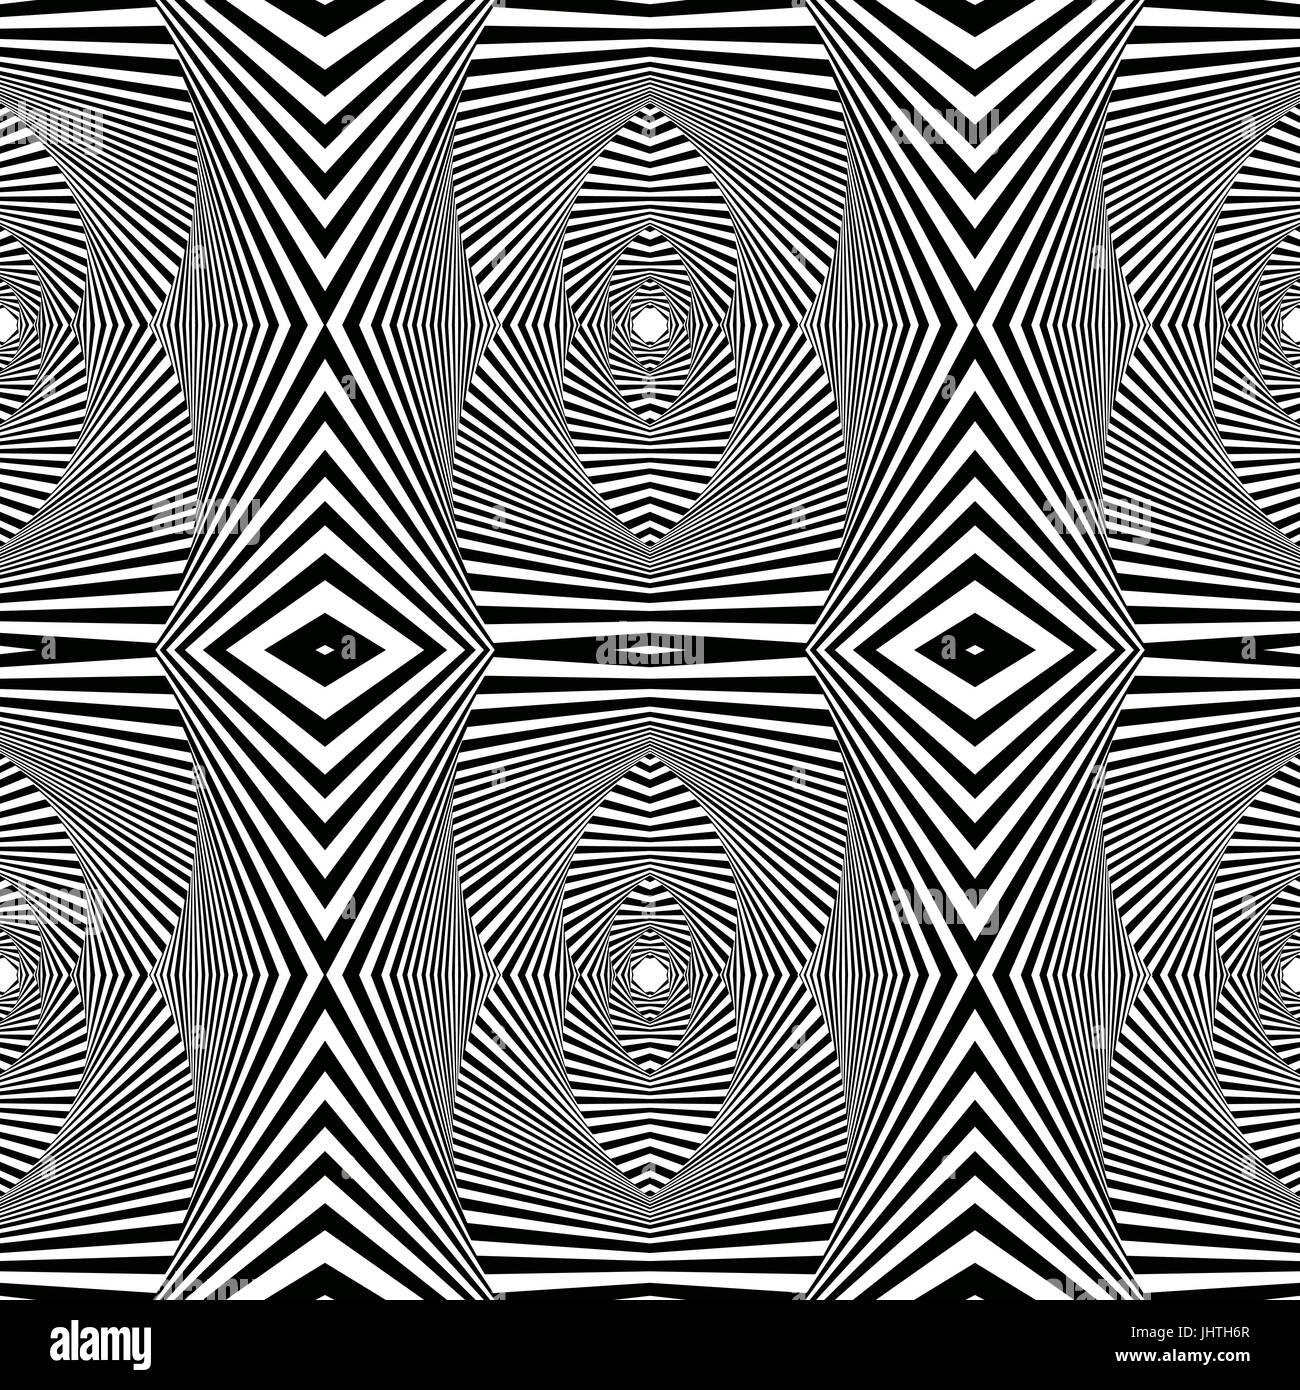 Abstract geometric black and white vector pattern with pseudo 3D visual effect Stock Vector